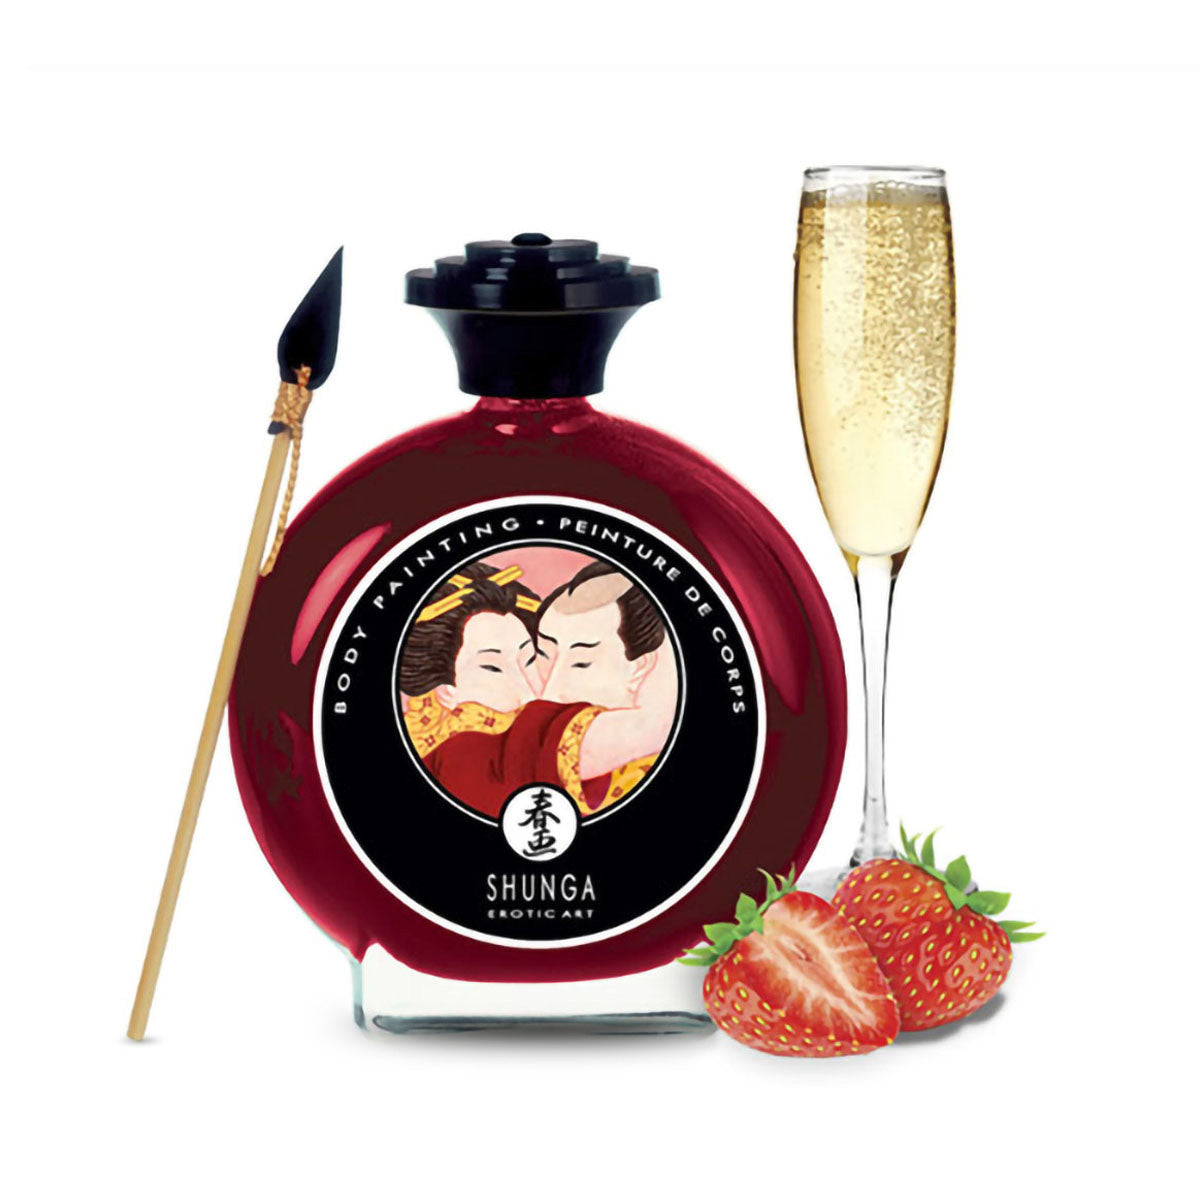 Shunga Edible Body Paint Painting with Brush Champagne & Strawberry Flavored